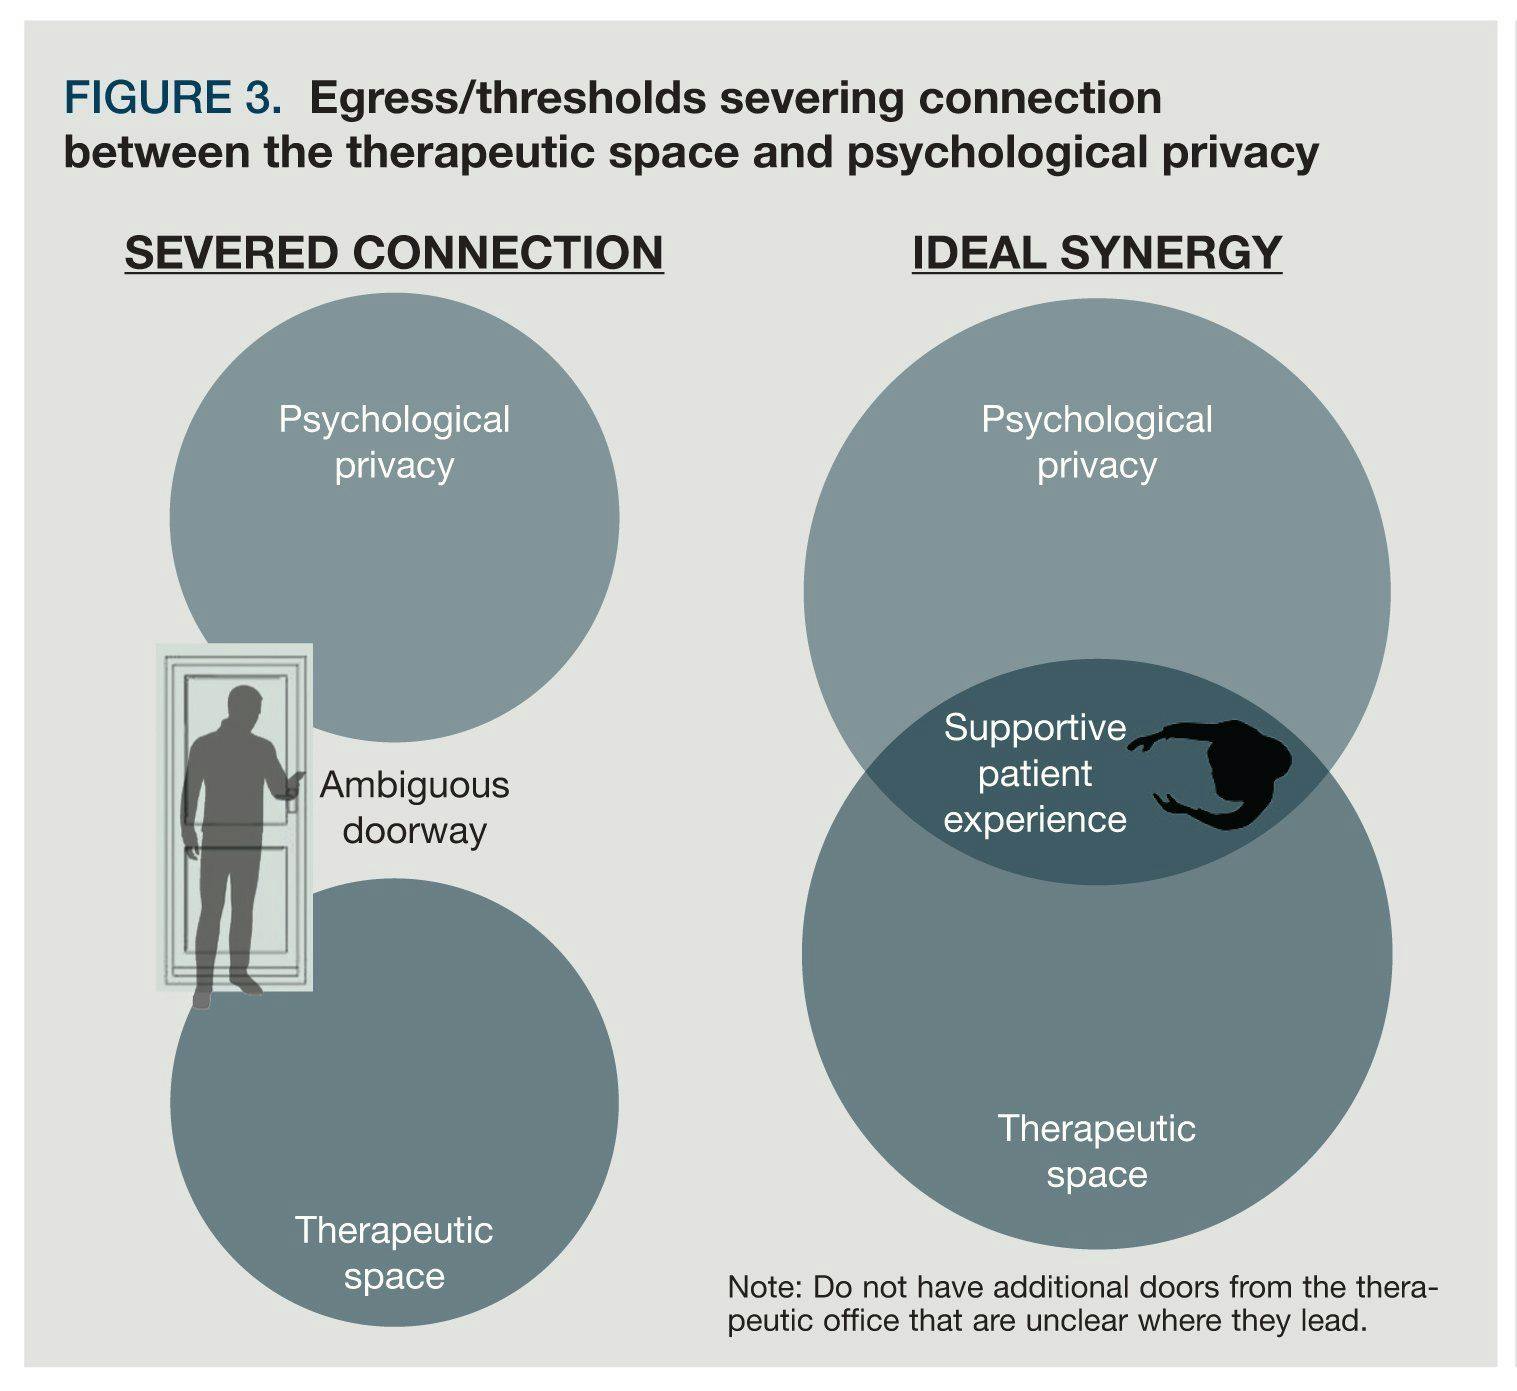 Egress/thresholds severing connection between the therapeutic space an